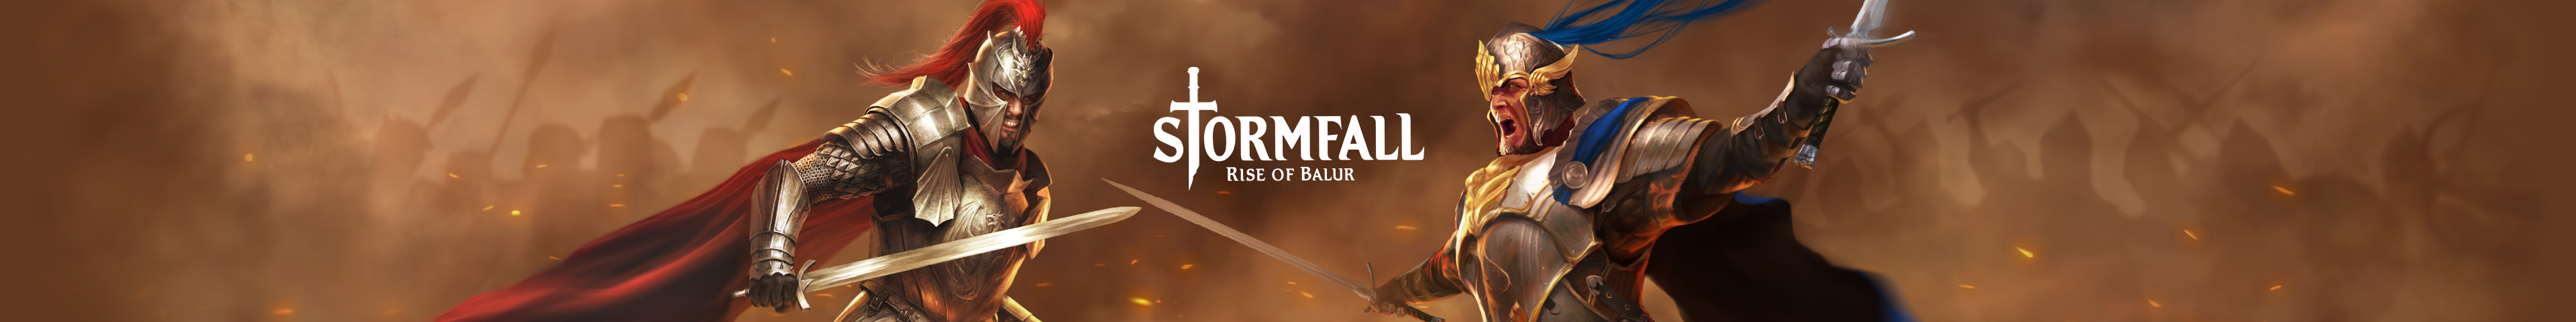 Stormfall: Rise of Balur - Stoneheart Castle Video Guide Part 3